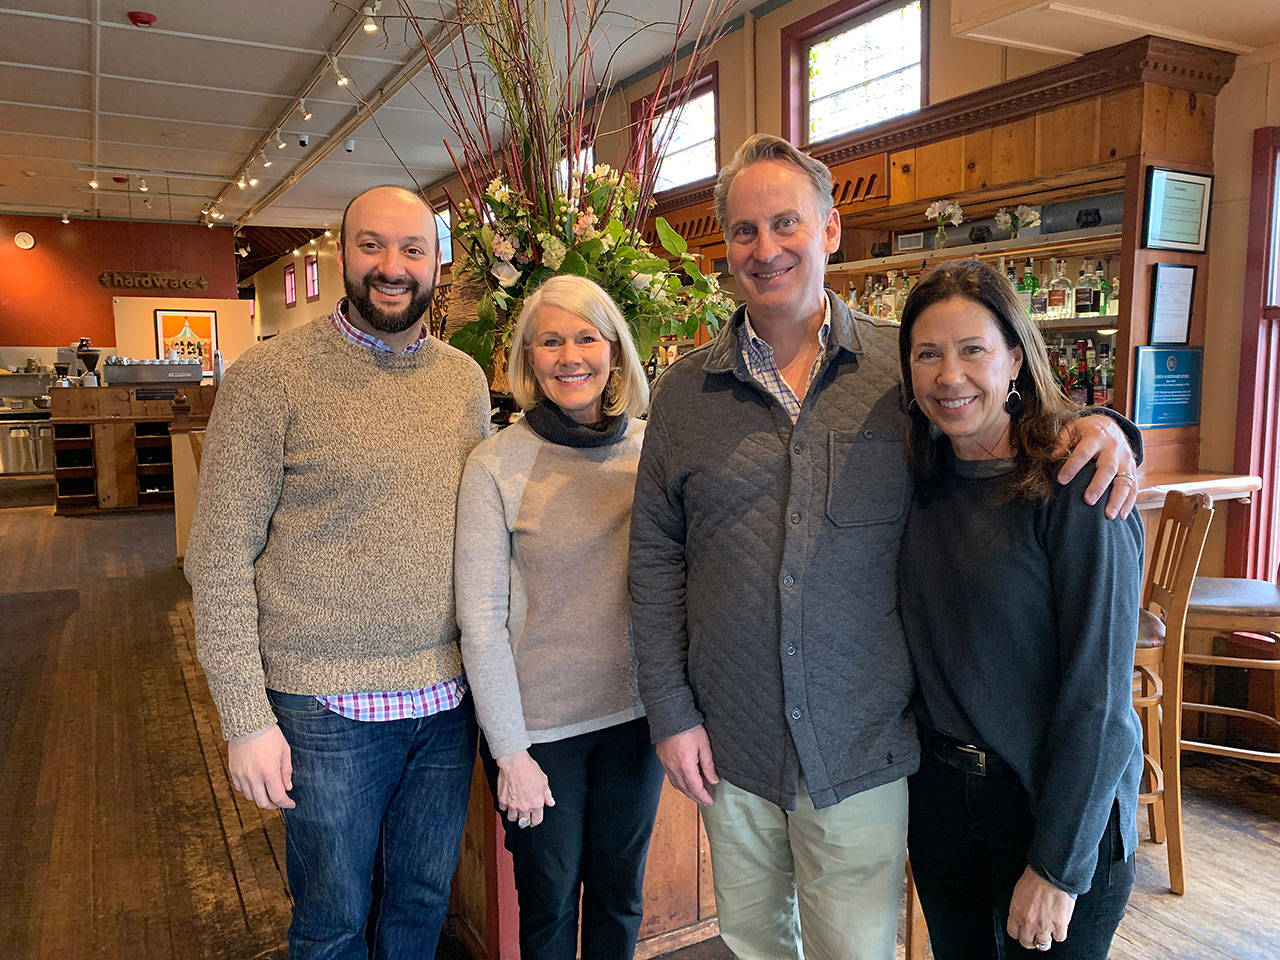 (Left to right): Adam Chumas, general manager; Melinda Powers, founder, former general manager and owner; and managing partners Rob and Janie Andrews pose for a picture on Monday, Feb. 3, at the Hardware Store Restaurant. (Kevin Opsahl/Staff Photo)